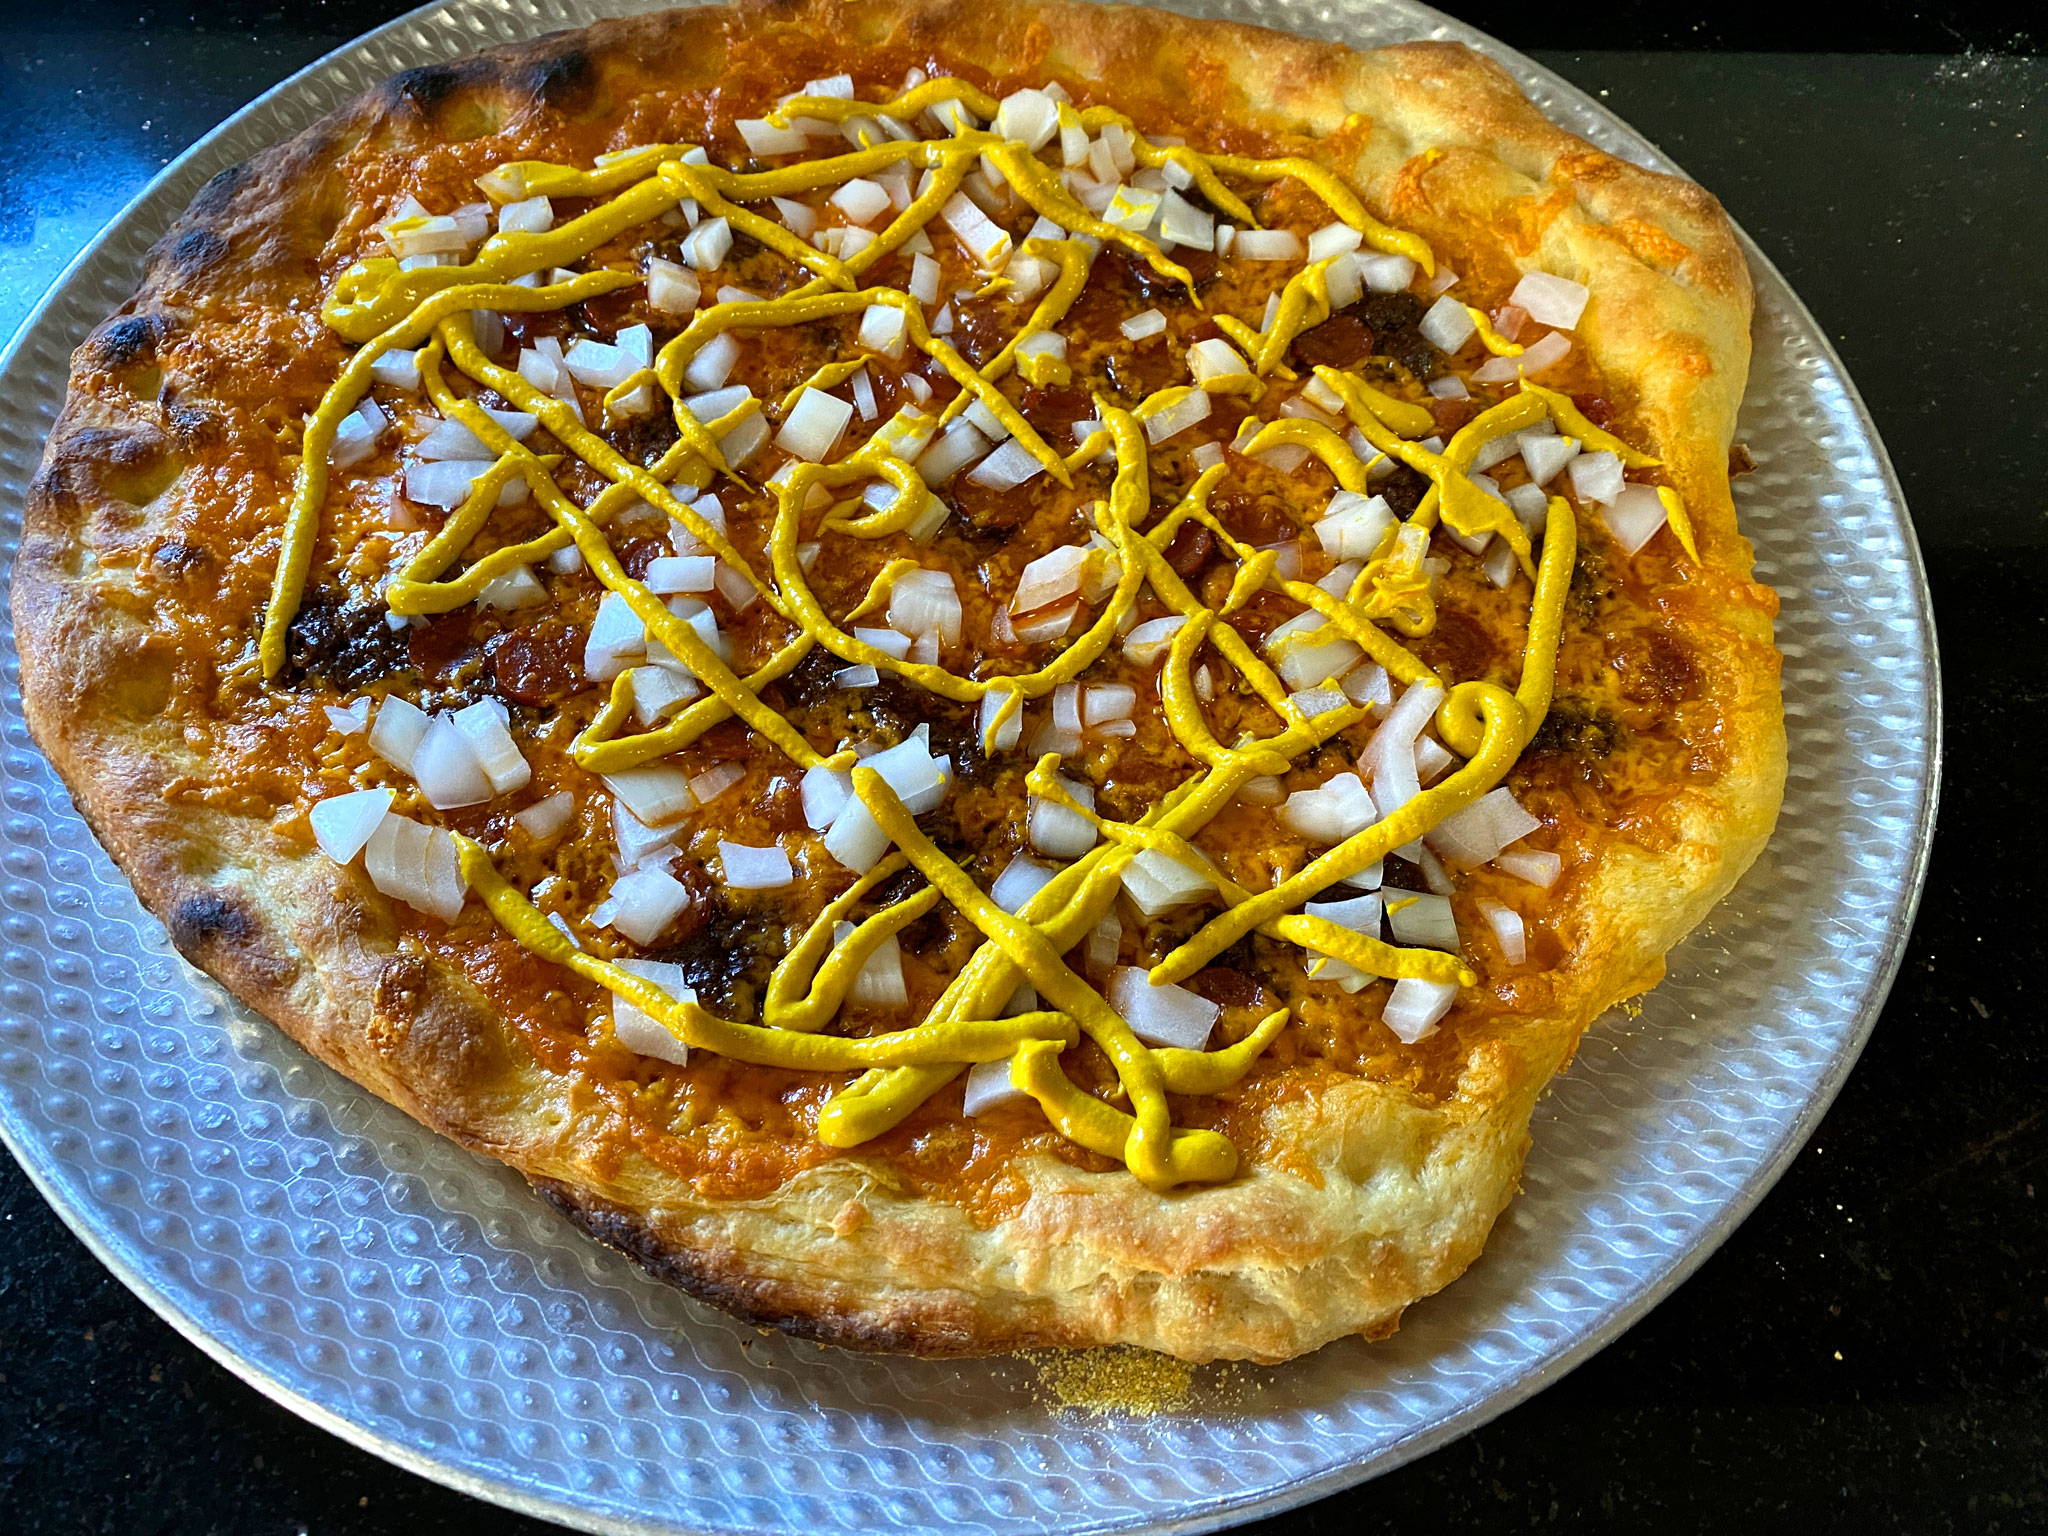 Coney Island Chili Dog Pizza - Sargento Shredded Cheddar Cheese, Hebrew National Kosher Beef Franks, Skyline Beef Chili (no beans), Diced White Onion, French's Yellow Mustard